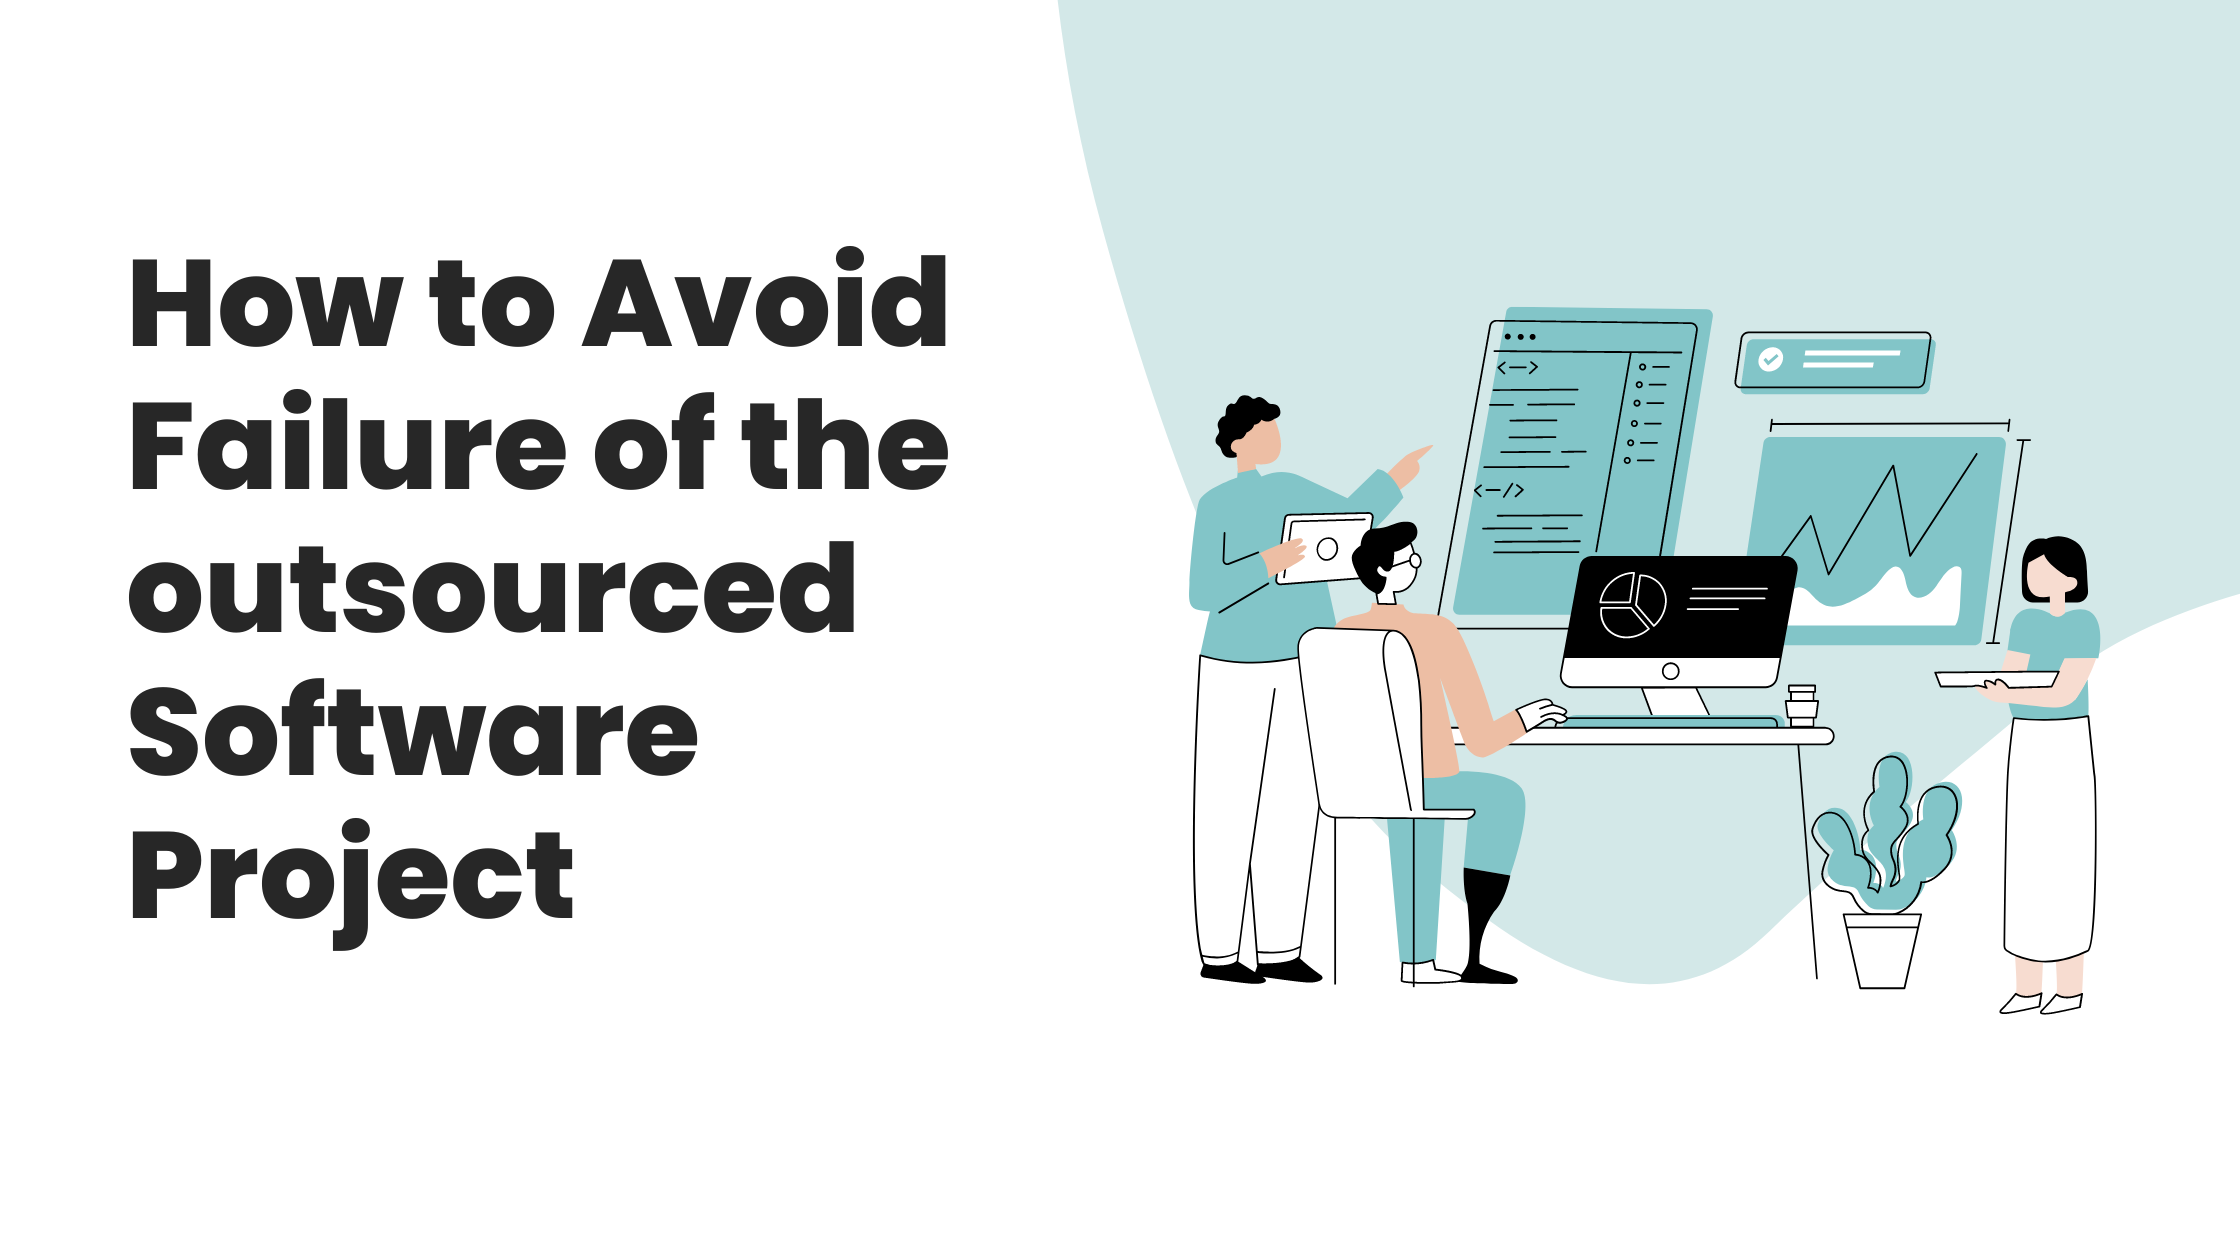 How to Avoid Failure of the outsourced Software Project